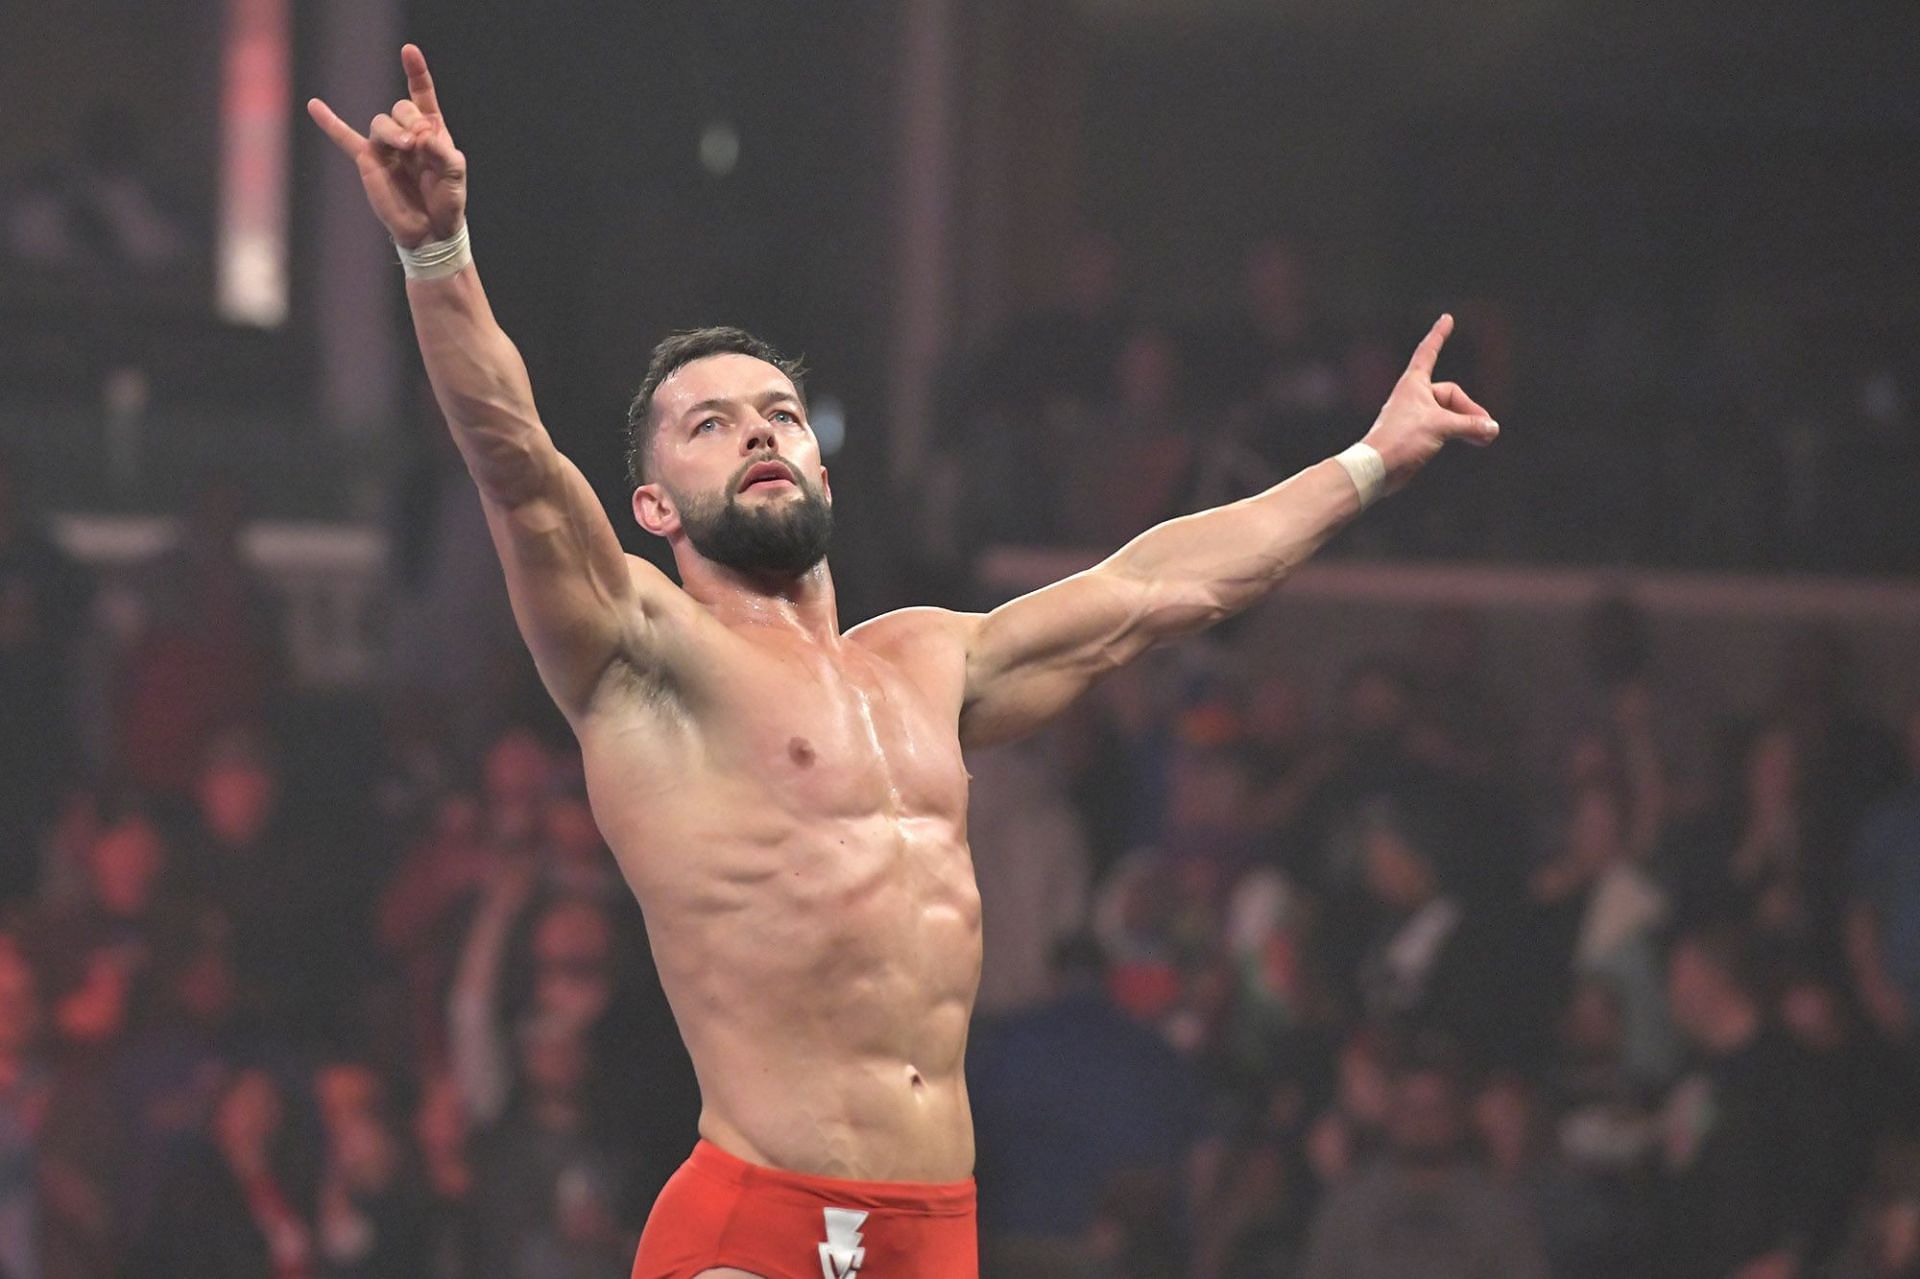 Finn Balor was in action on Main Event this week